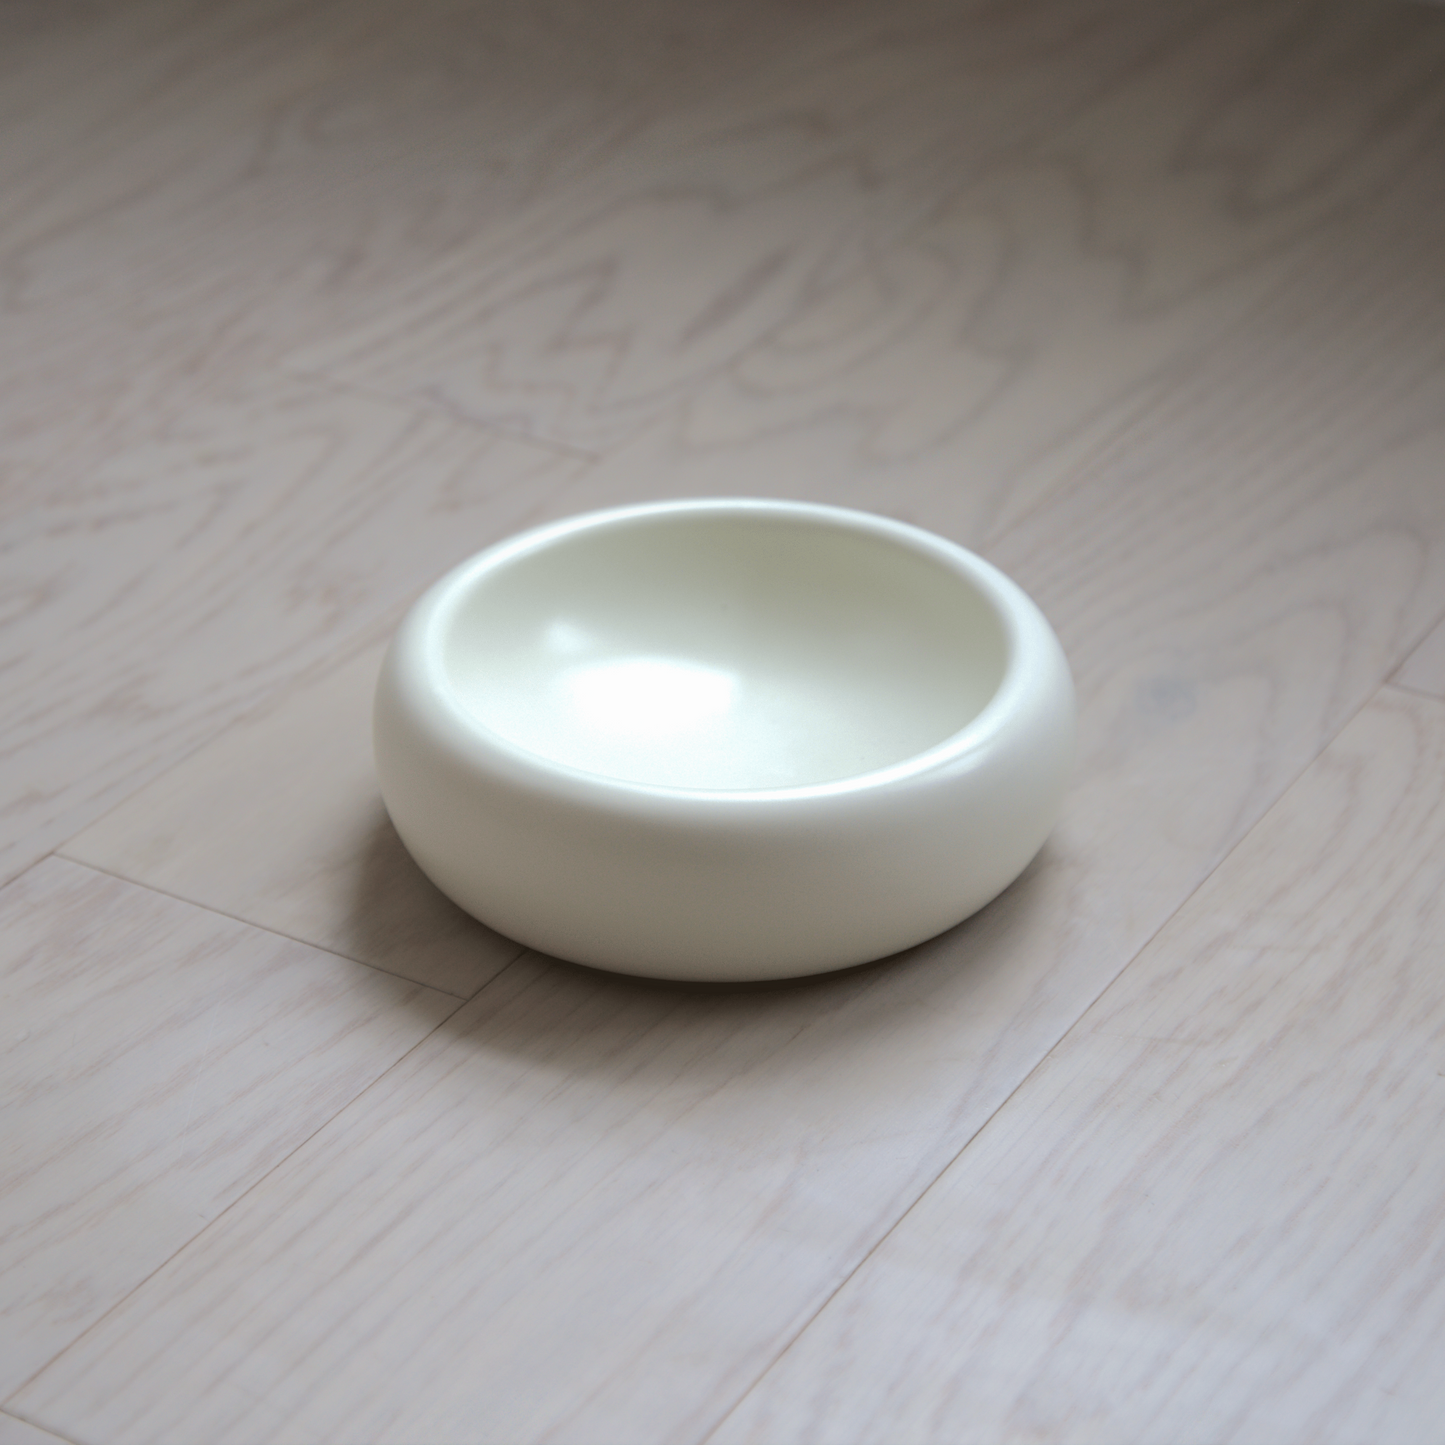 catenary white ceramic cat bowl on hardwood floor that is a whisker fatigue bowl with wide and shallow design